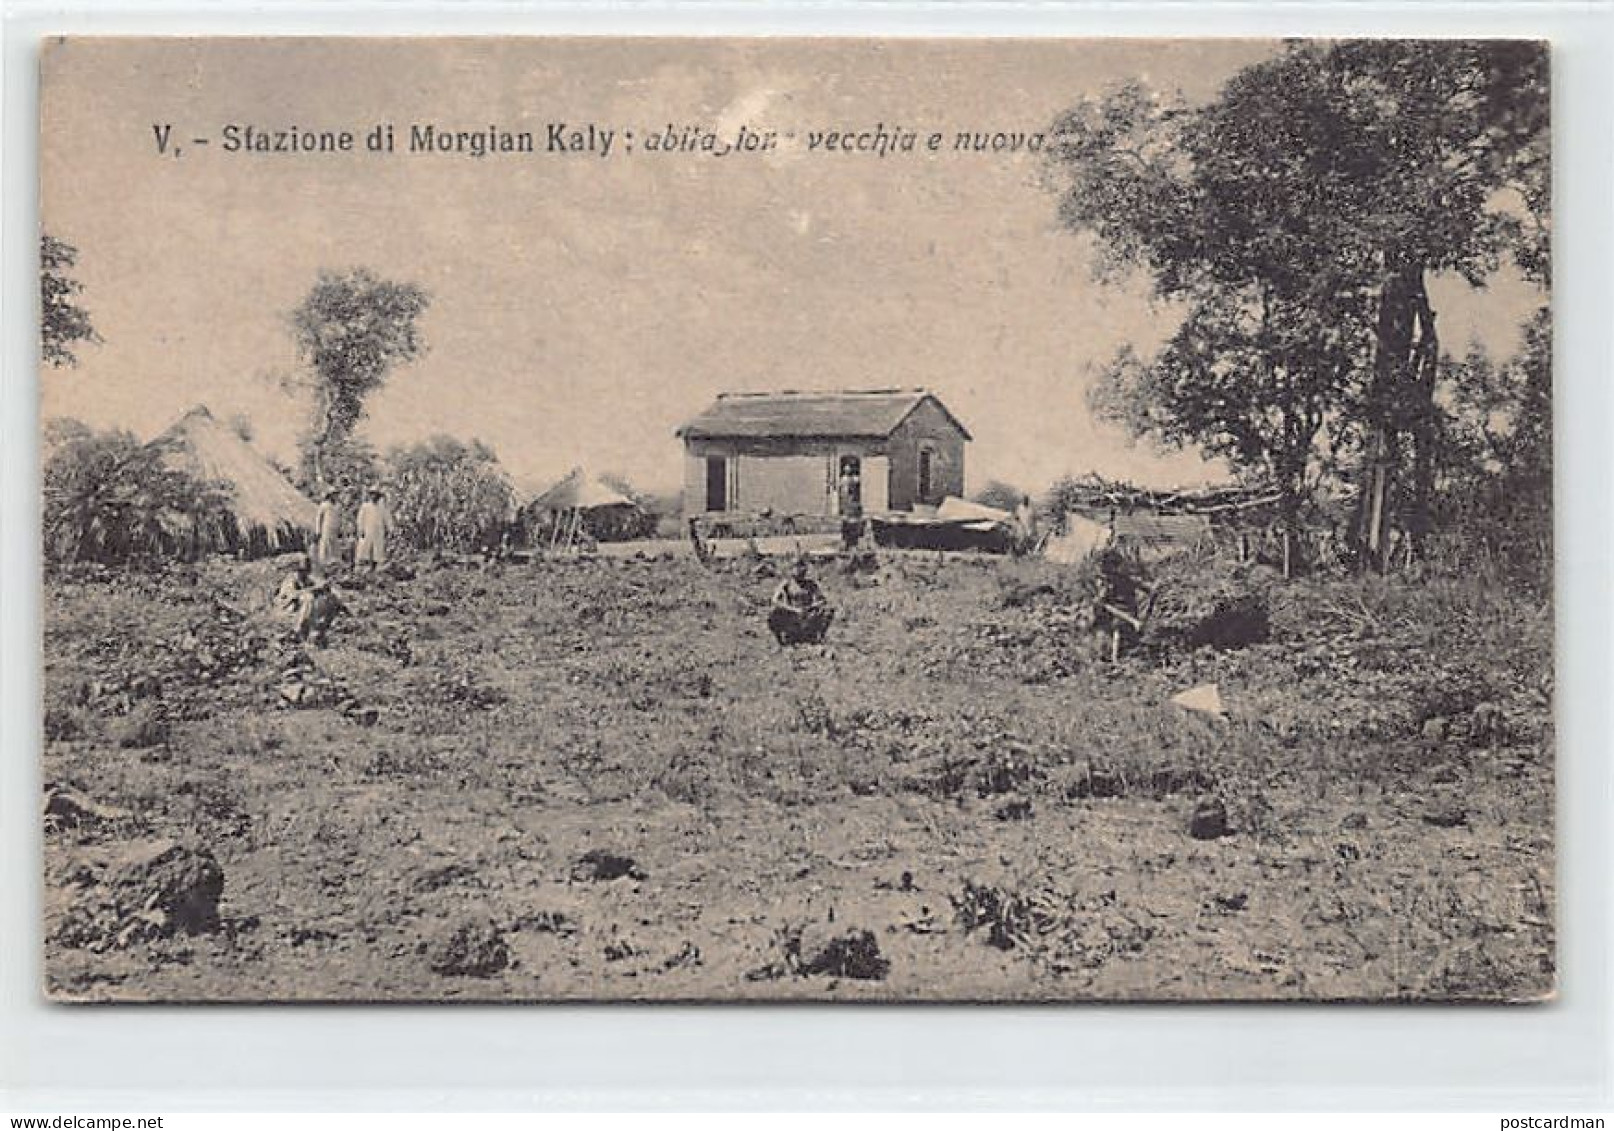 Eritrea - MORGIAN KALY - The Missionary Station - Publ. African Missions Of Verona, Italy 209 - Eritrea